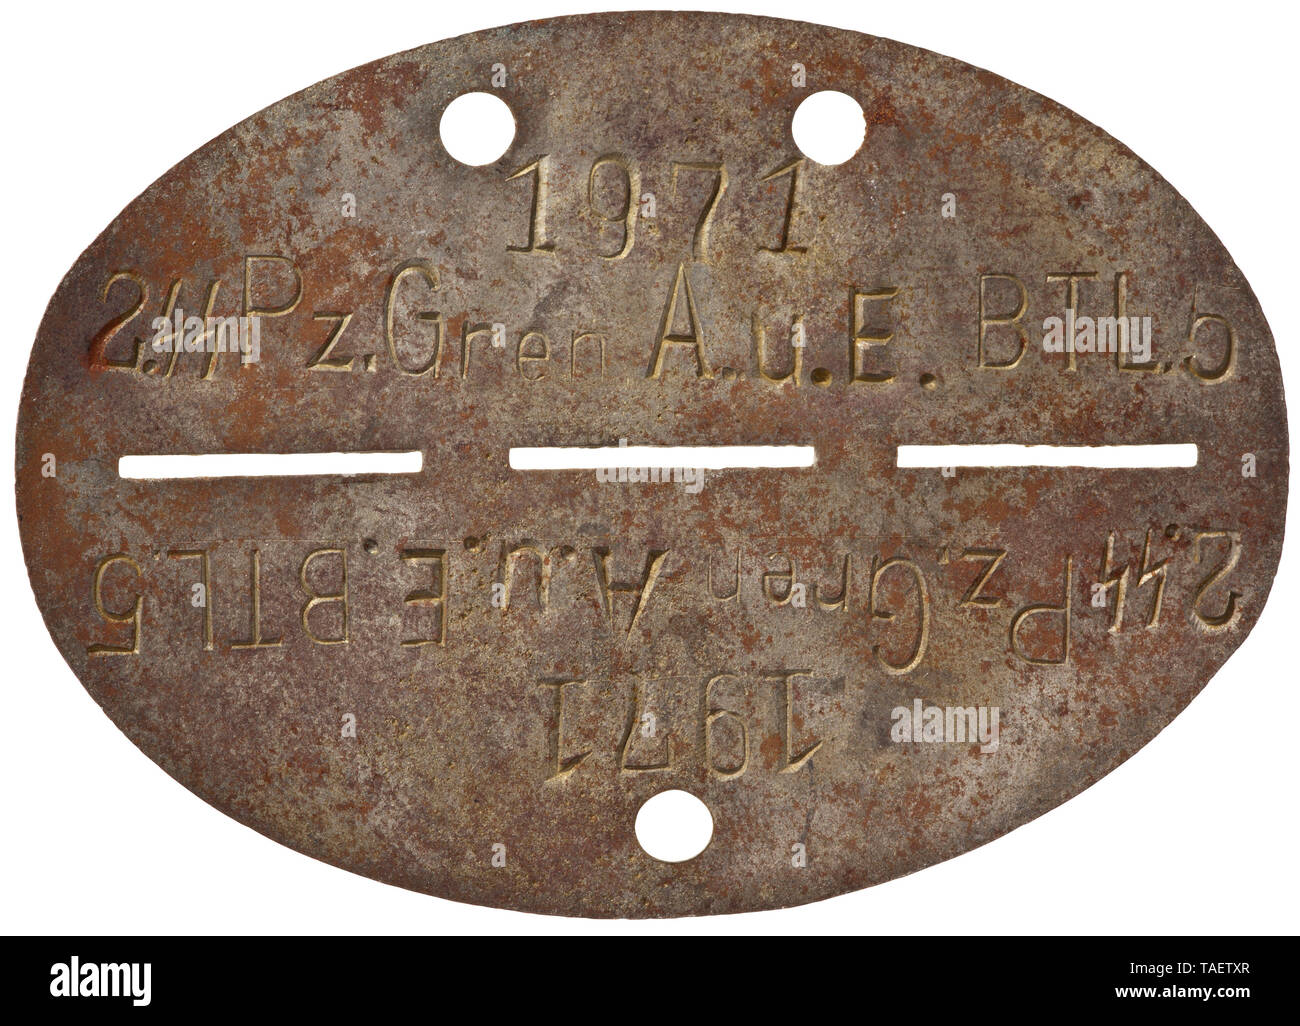 An identification tag, SS Panzer Grenadier Battalion 5 Eisenblech (oxidiert) mit vs. Bezeichnung '1971 - 2.SS Pz.Gren.A.u.E. Btl. 5', rs. ohne Markung. historic, historical, 20th century, 1930s, 1940s, Waffen-SS, armed division of the SS, armed service, armed services, NS, National Socialism, Nazism, Third Reich, German Reich, Germany, military, militaria, utensil, piece of equipment, utensils, object, objects, stills, clipping, clippings, cut out, cut-out, cut-outs, fascism, fascistic, National Socialist, Nazi, Nazi period, Editorial-Use-Only Stock Photo